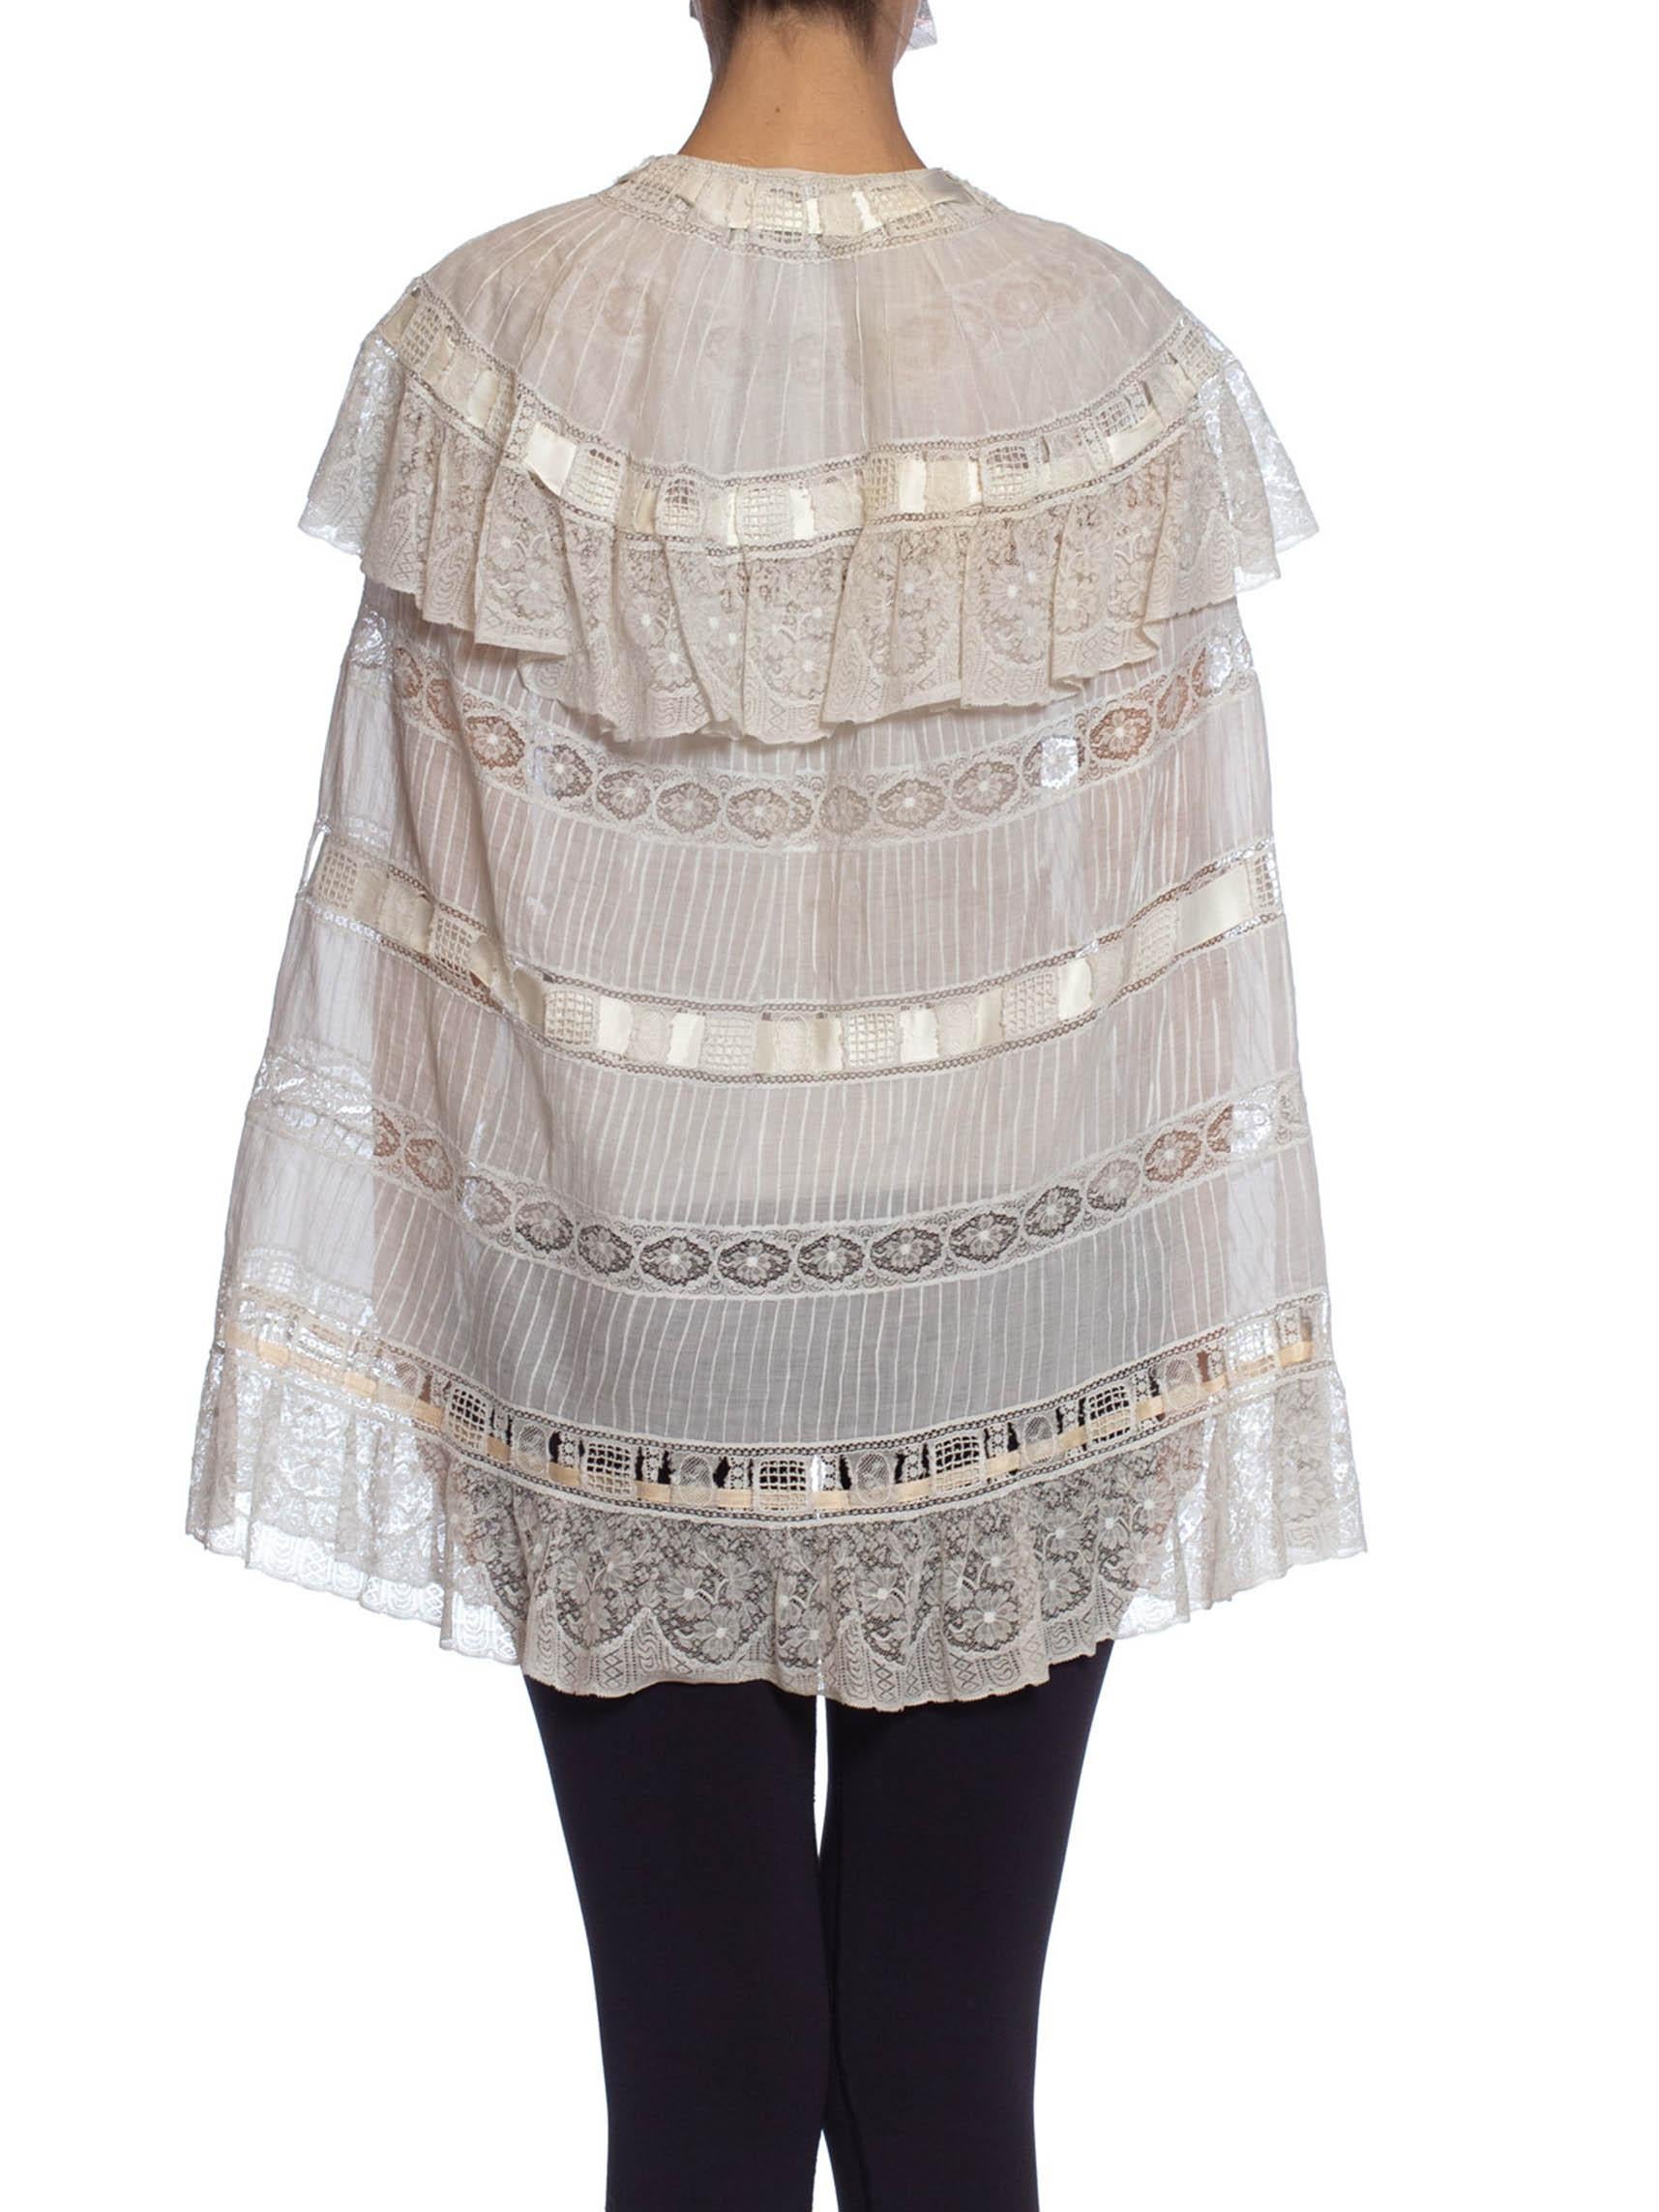 Victorian White Cotton Voile and Lace Cape Entirely Pin-Tucked By Hand ...